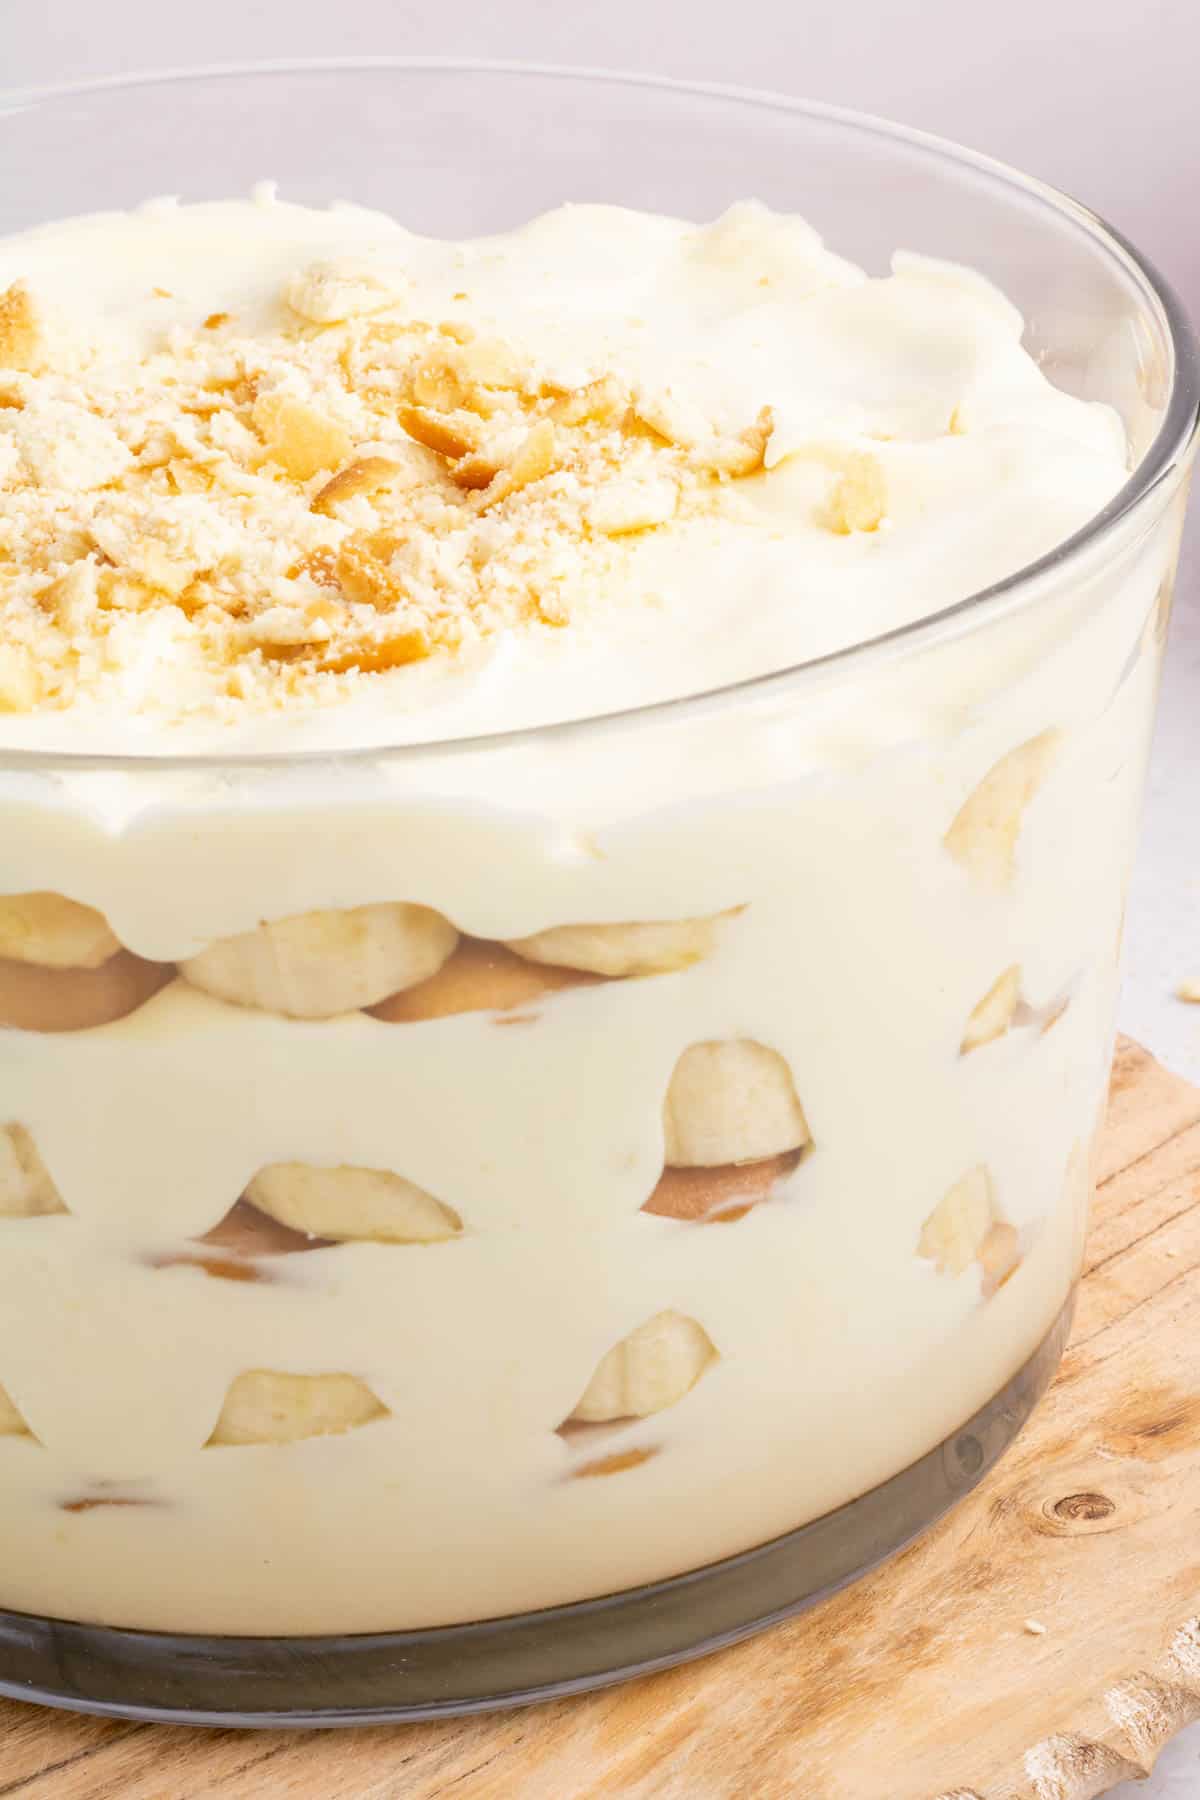 A trifle dish filled with Magnolia Banana Pudding.